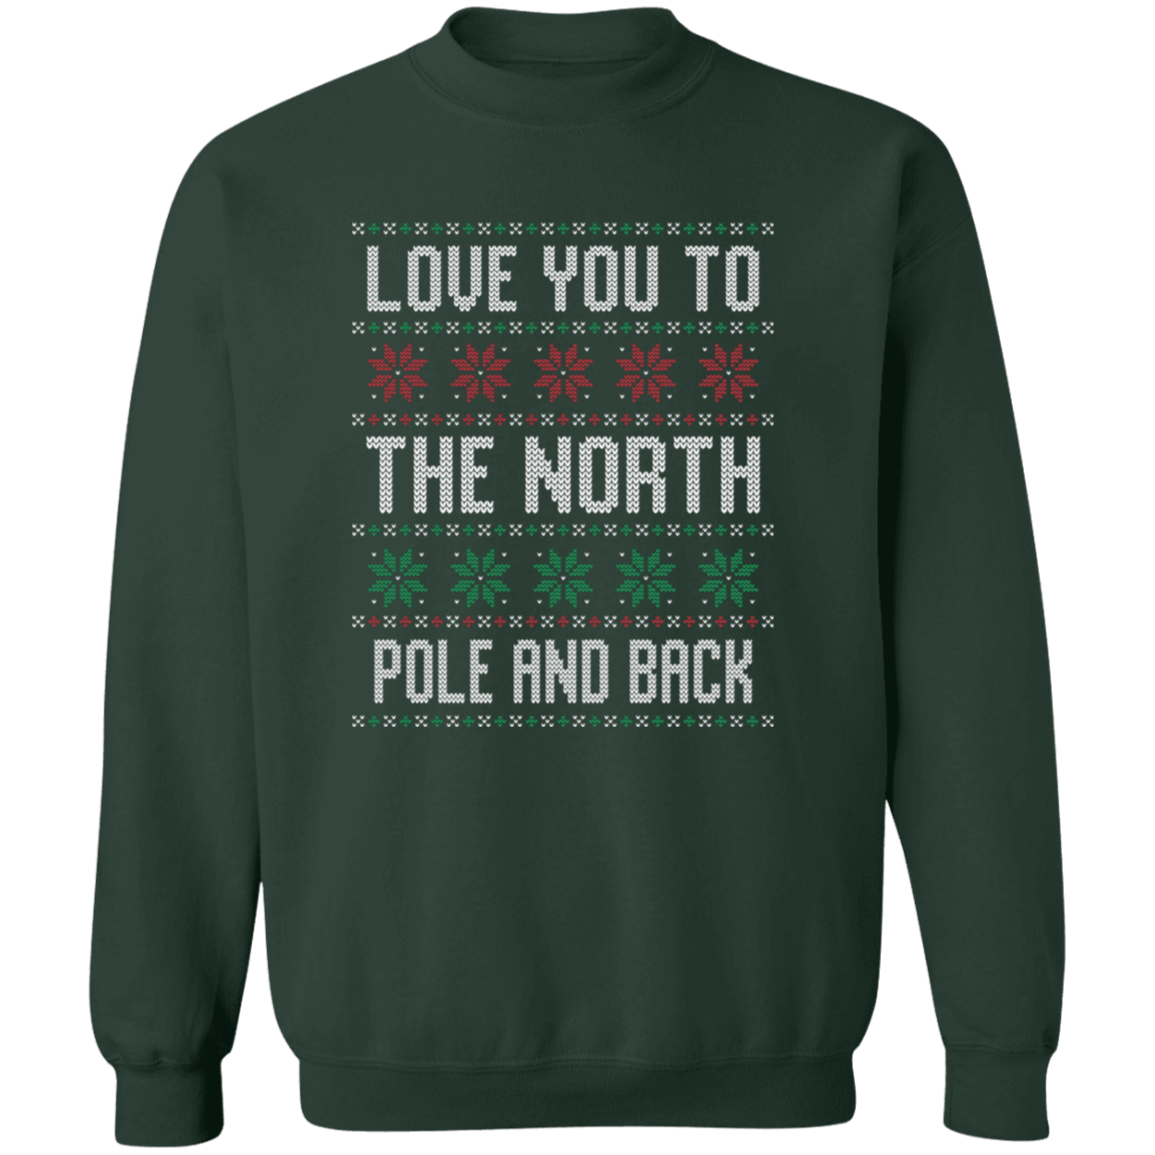 Love You To The North Pole And Back Sweatshirt